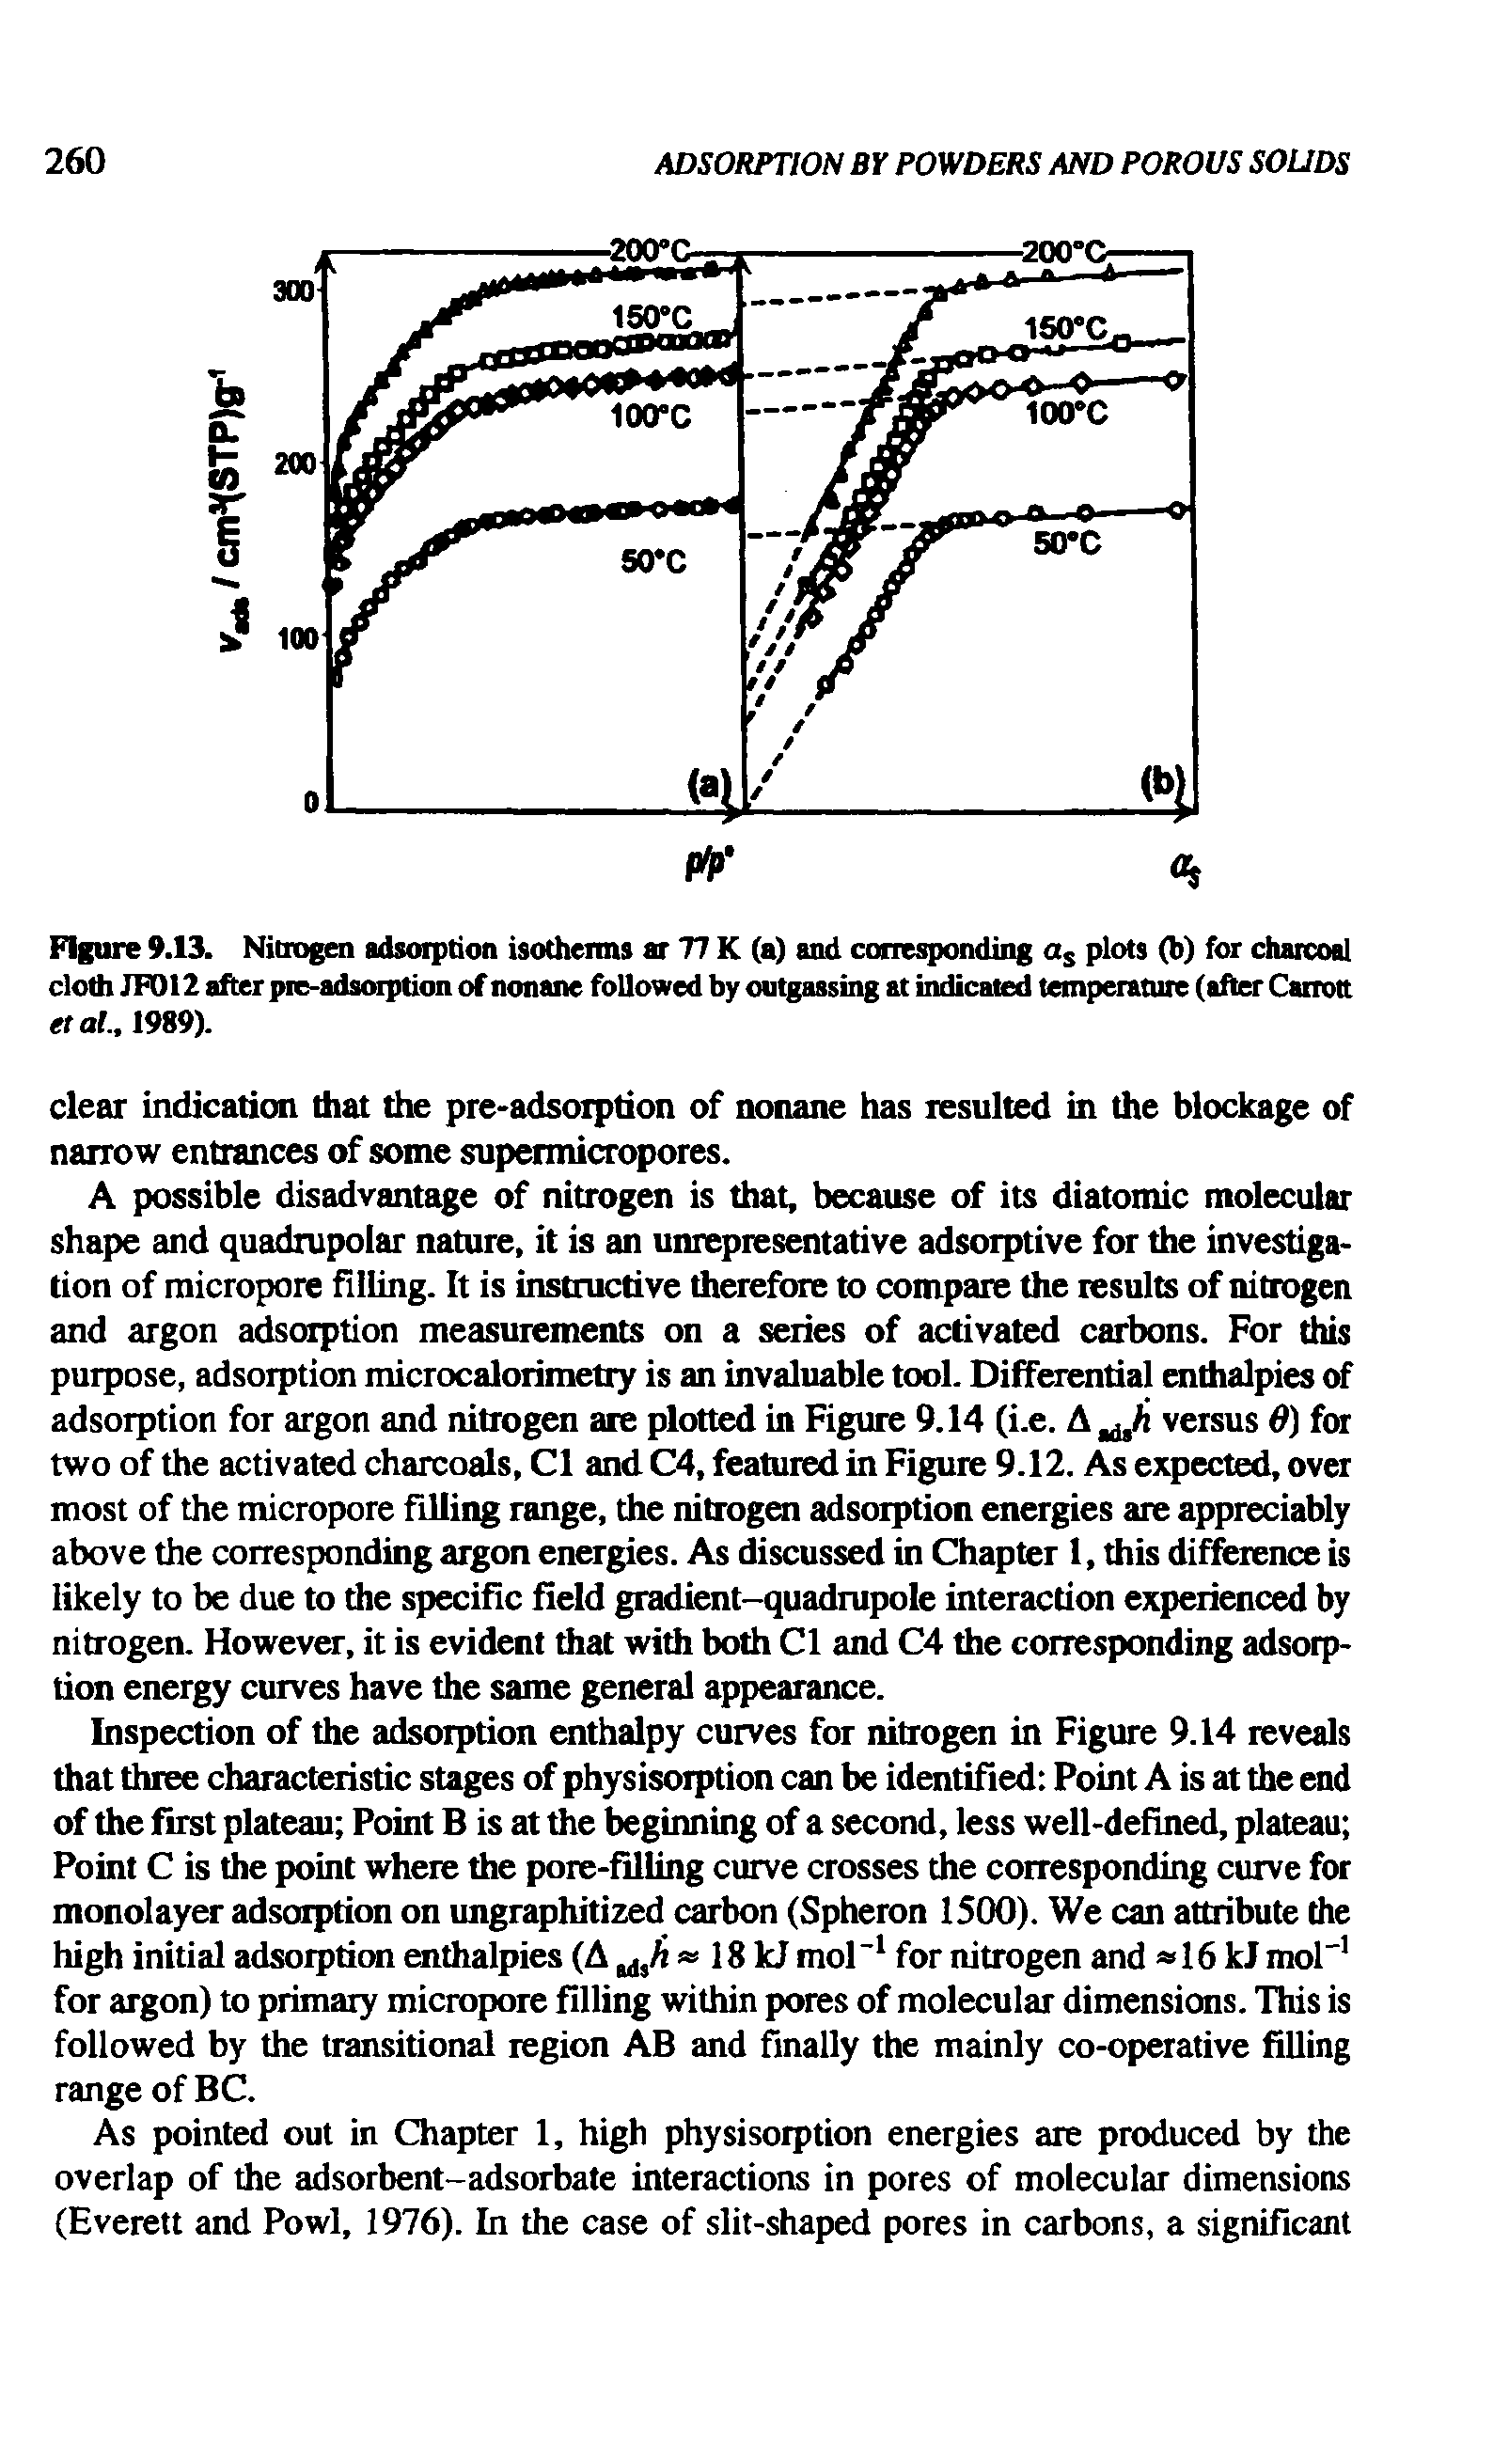 Figure 9.13. Nitrogen adsorption isotherms ar 77 K (a) and corresponding as plots (b) for charcoal cloth JF012 after prc-adsoiption of nonane followed by outgassing at indicated temperature (after Carrott etal., 1989).